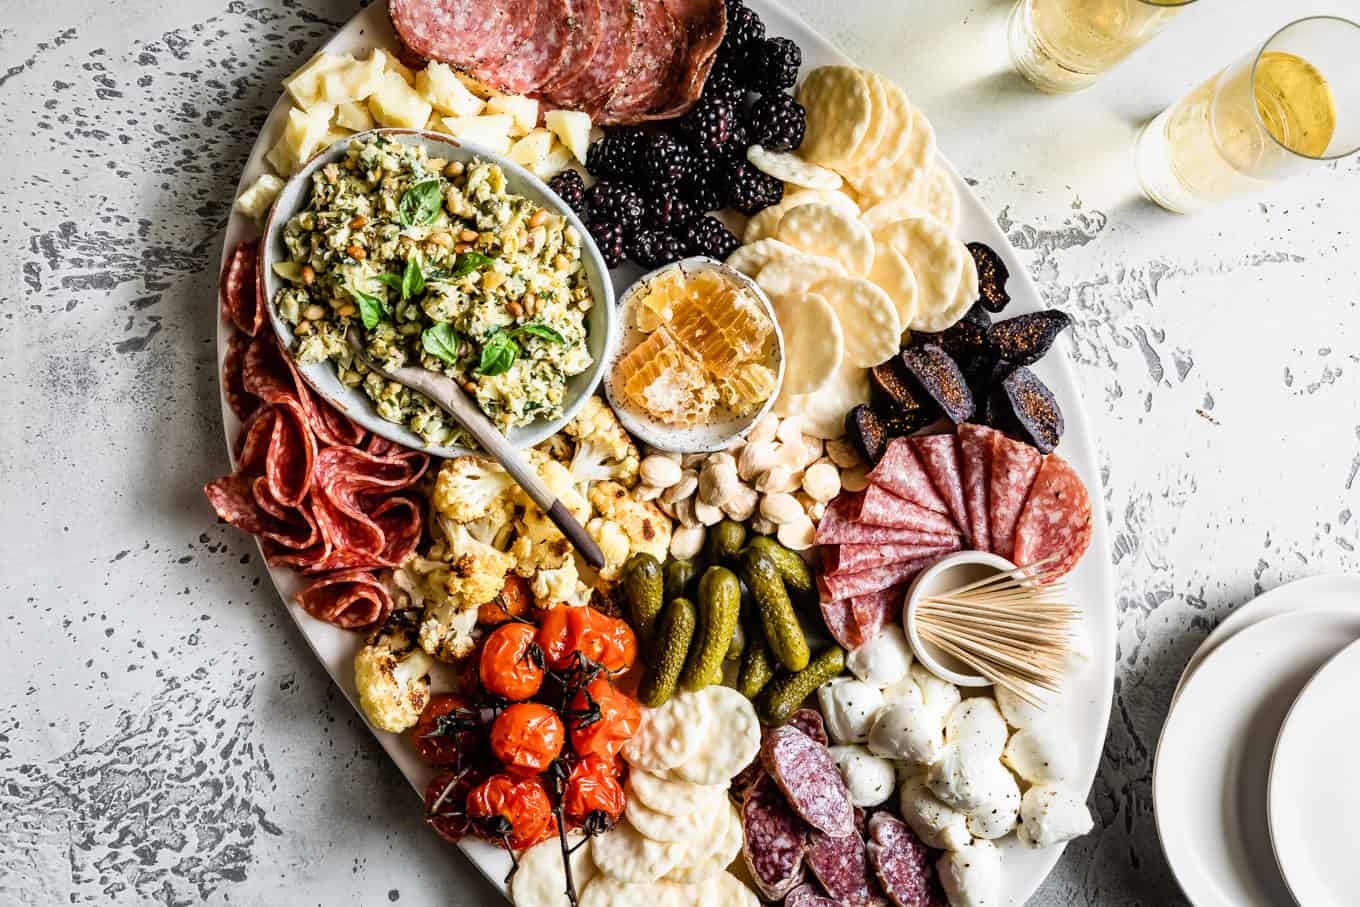 How to Build a Dinner-Worthy Charcuterie Board from https://www.snixykitchen.com/